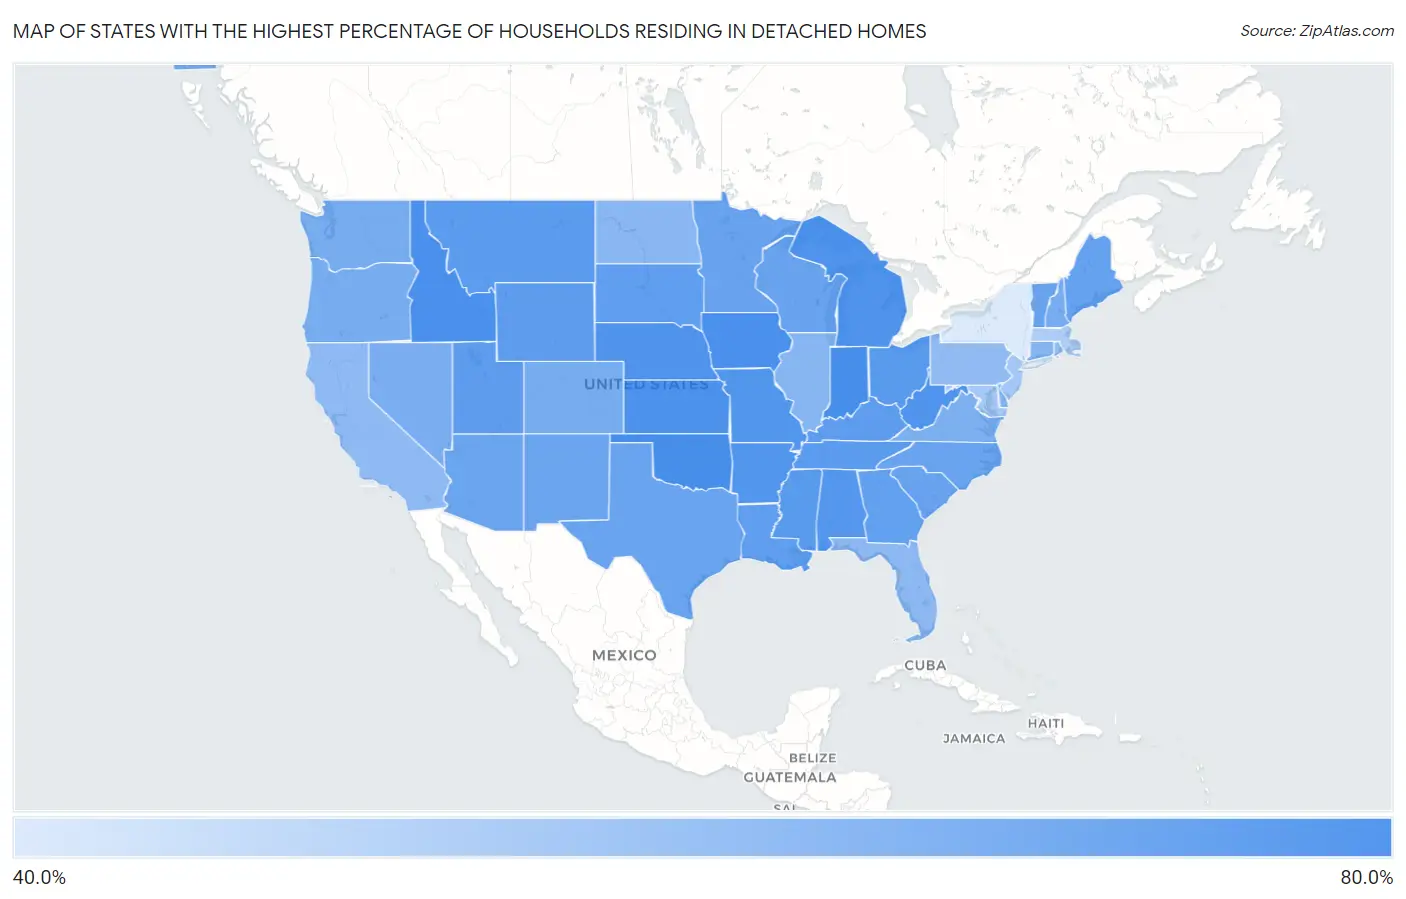 States with the Highest Percentage of Households Residing in Detached Homes in the United States Map